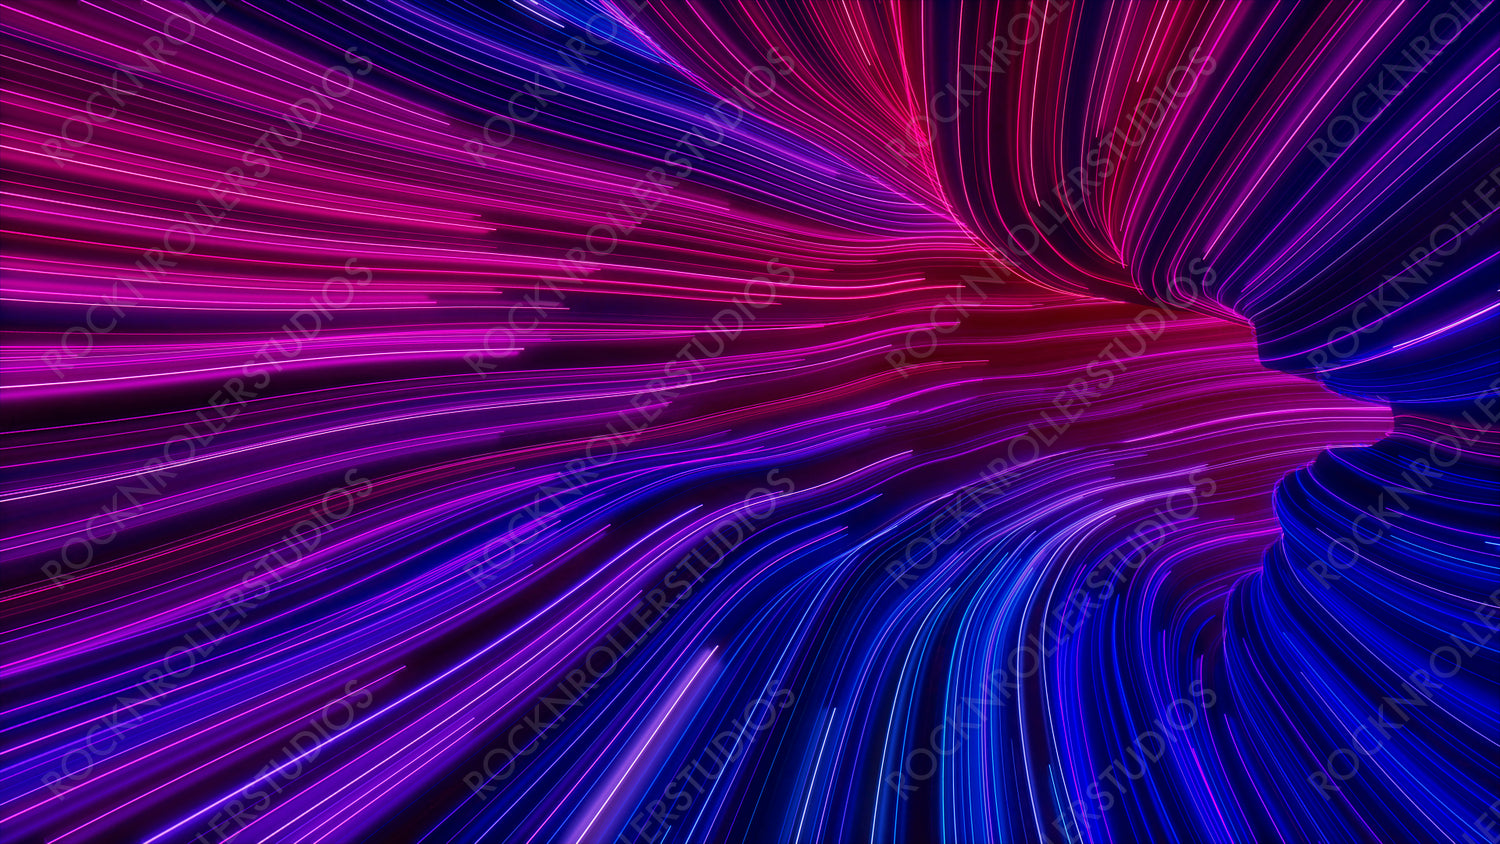 Abstract Neon Lines Tunnel with Purple, Blue and Pink Stripes. 3D Render.